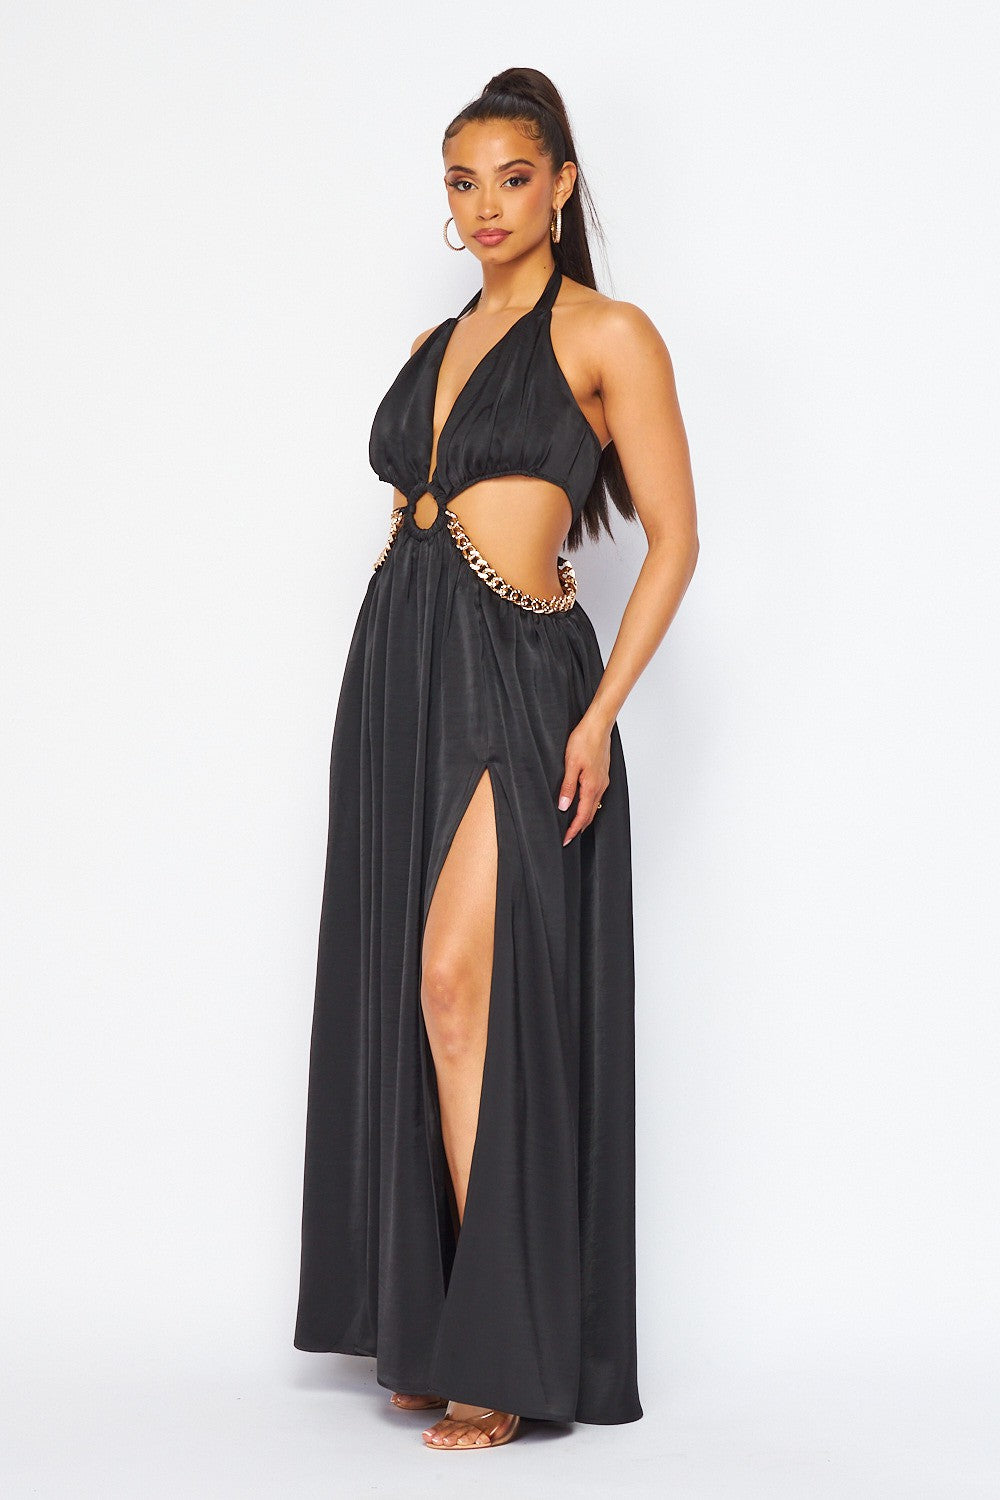 Always Poised Halter Neck Maxi Dress with Cutouts